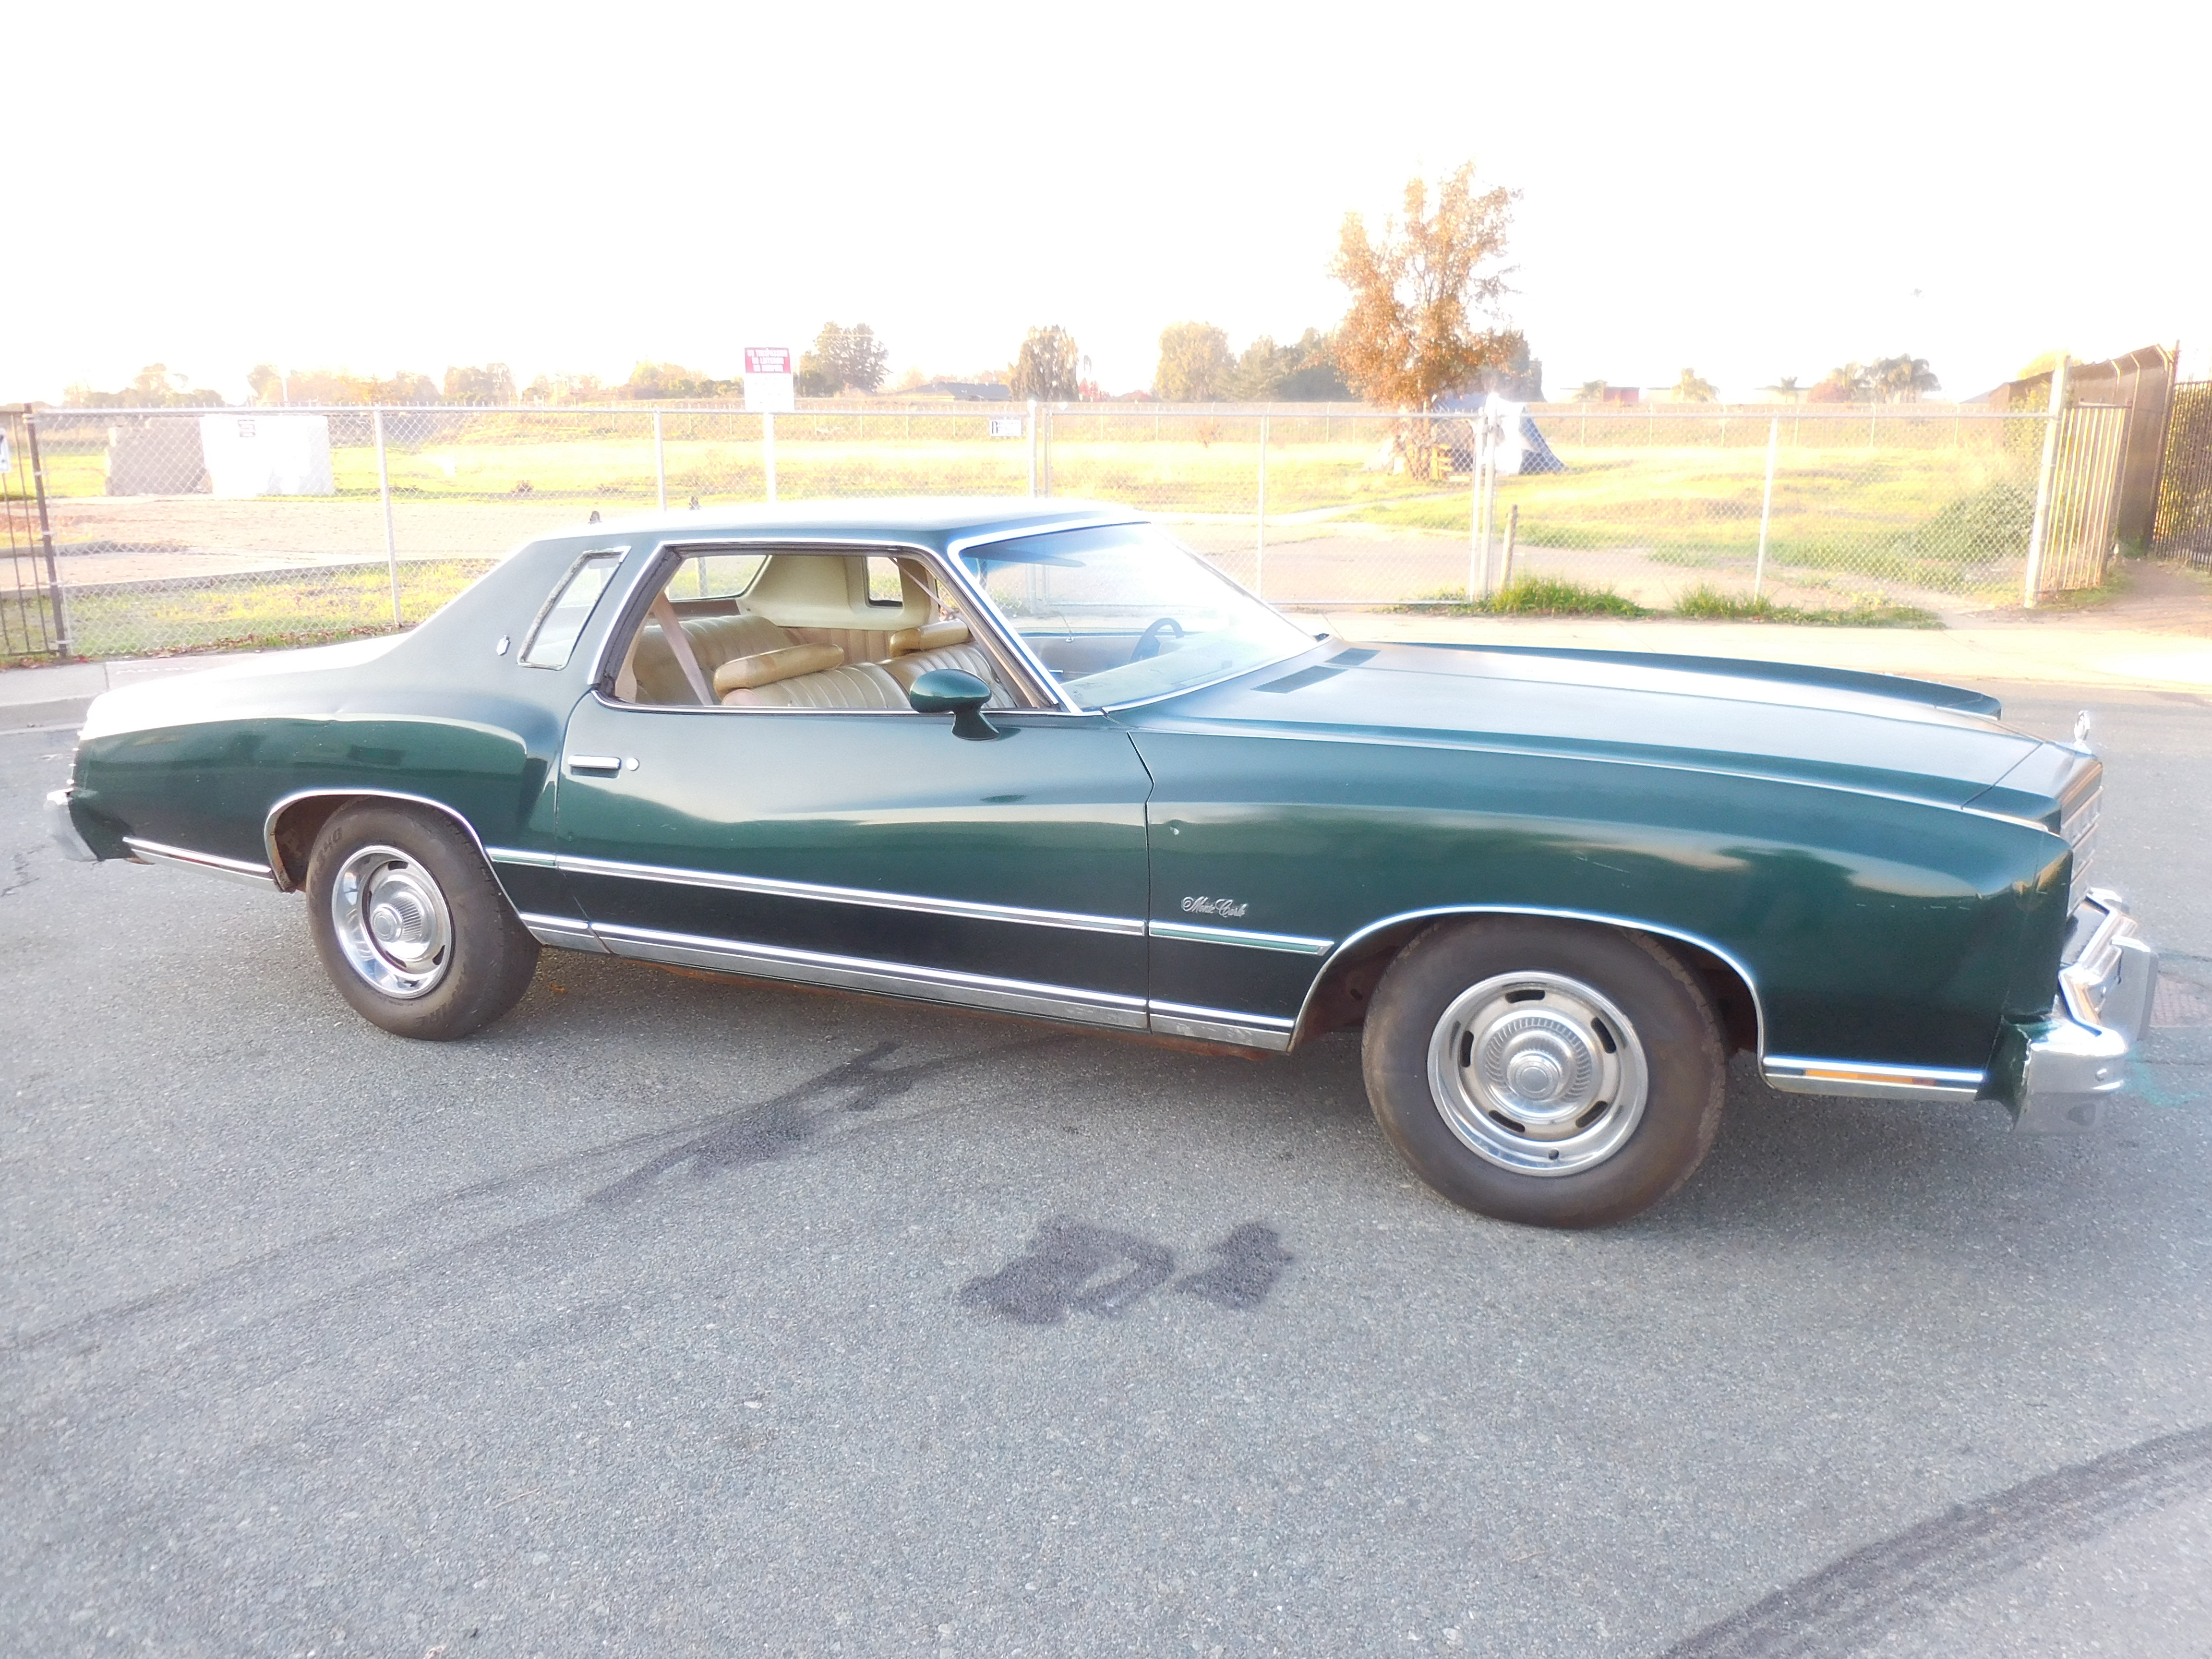 1977, Chevrolet, Monte, Carlo,cars for sale,car for,sale,cars,for,sale,car,